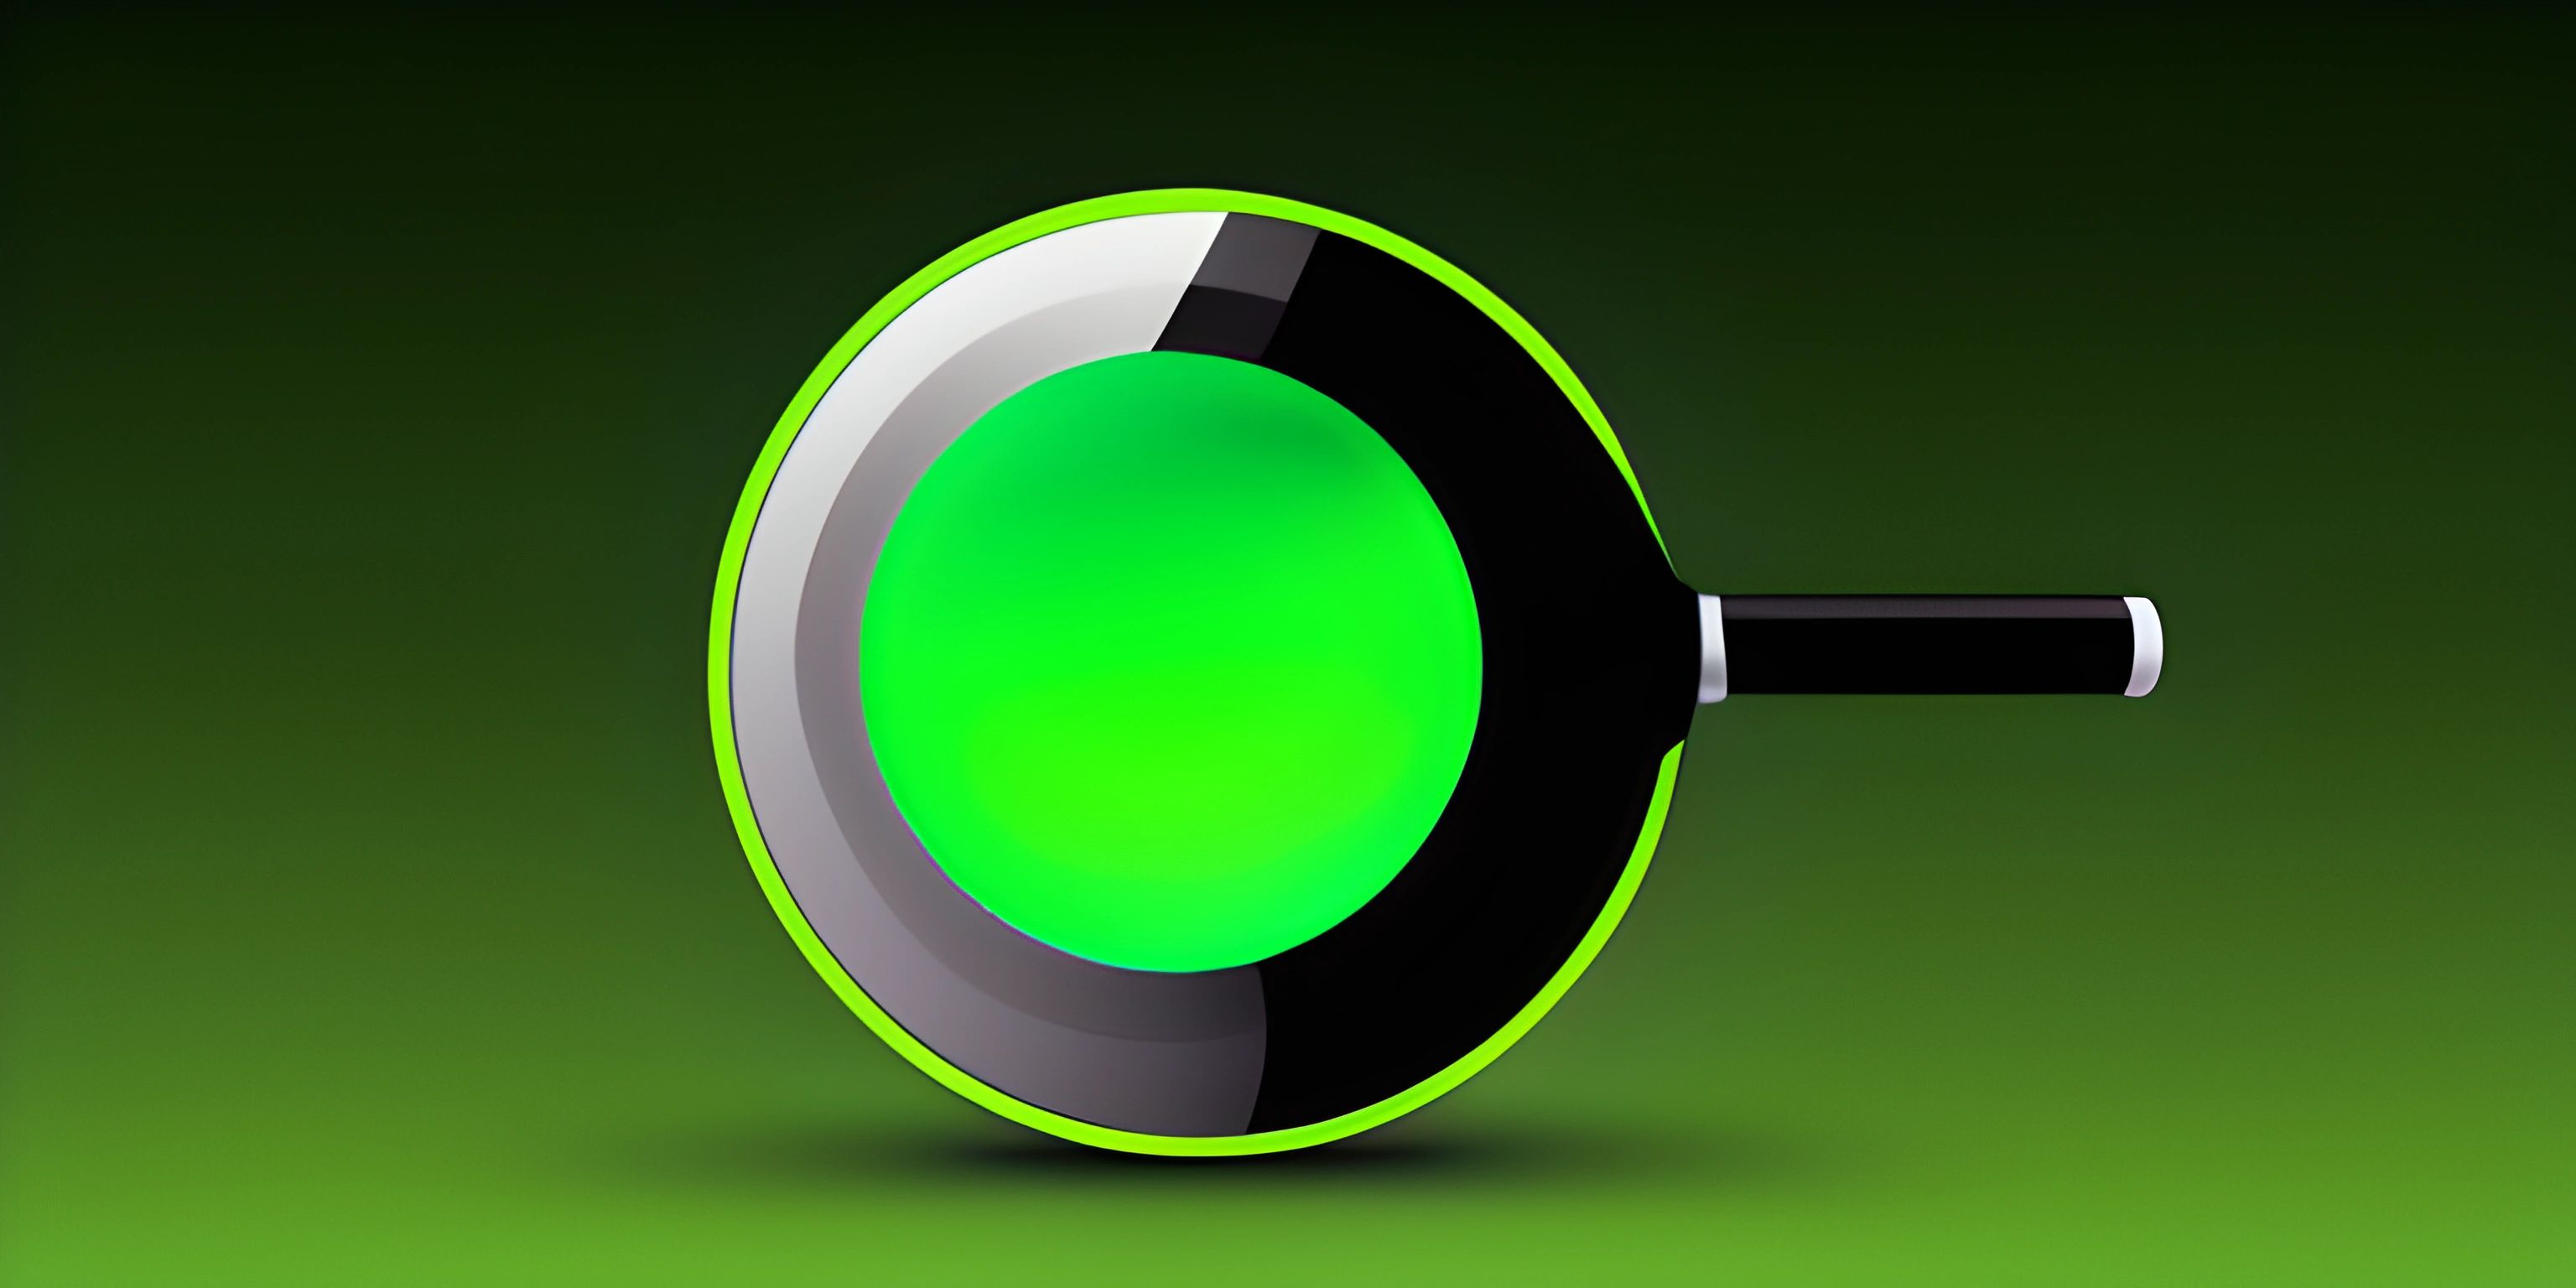 a green button is shown on a dark background that shows a circular structure with a black base